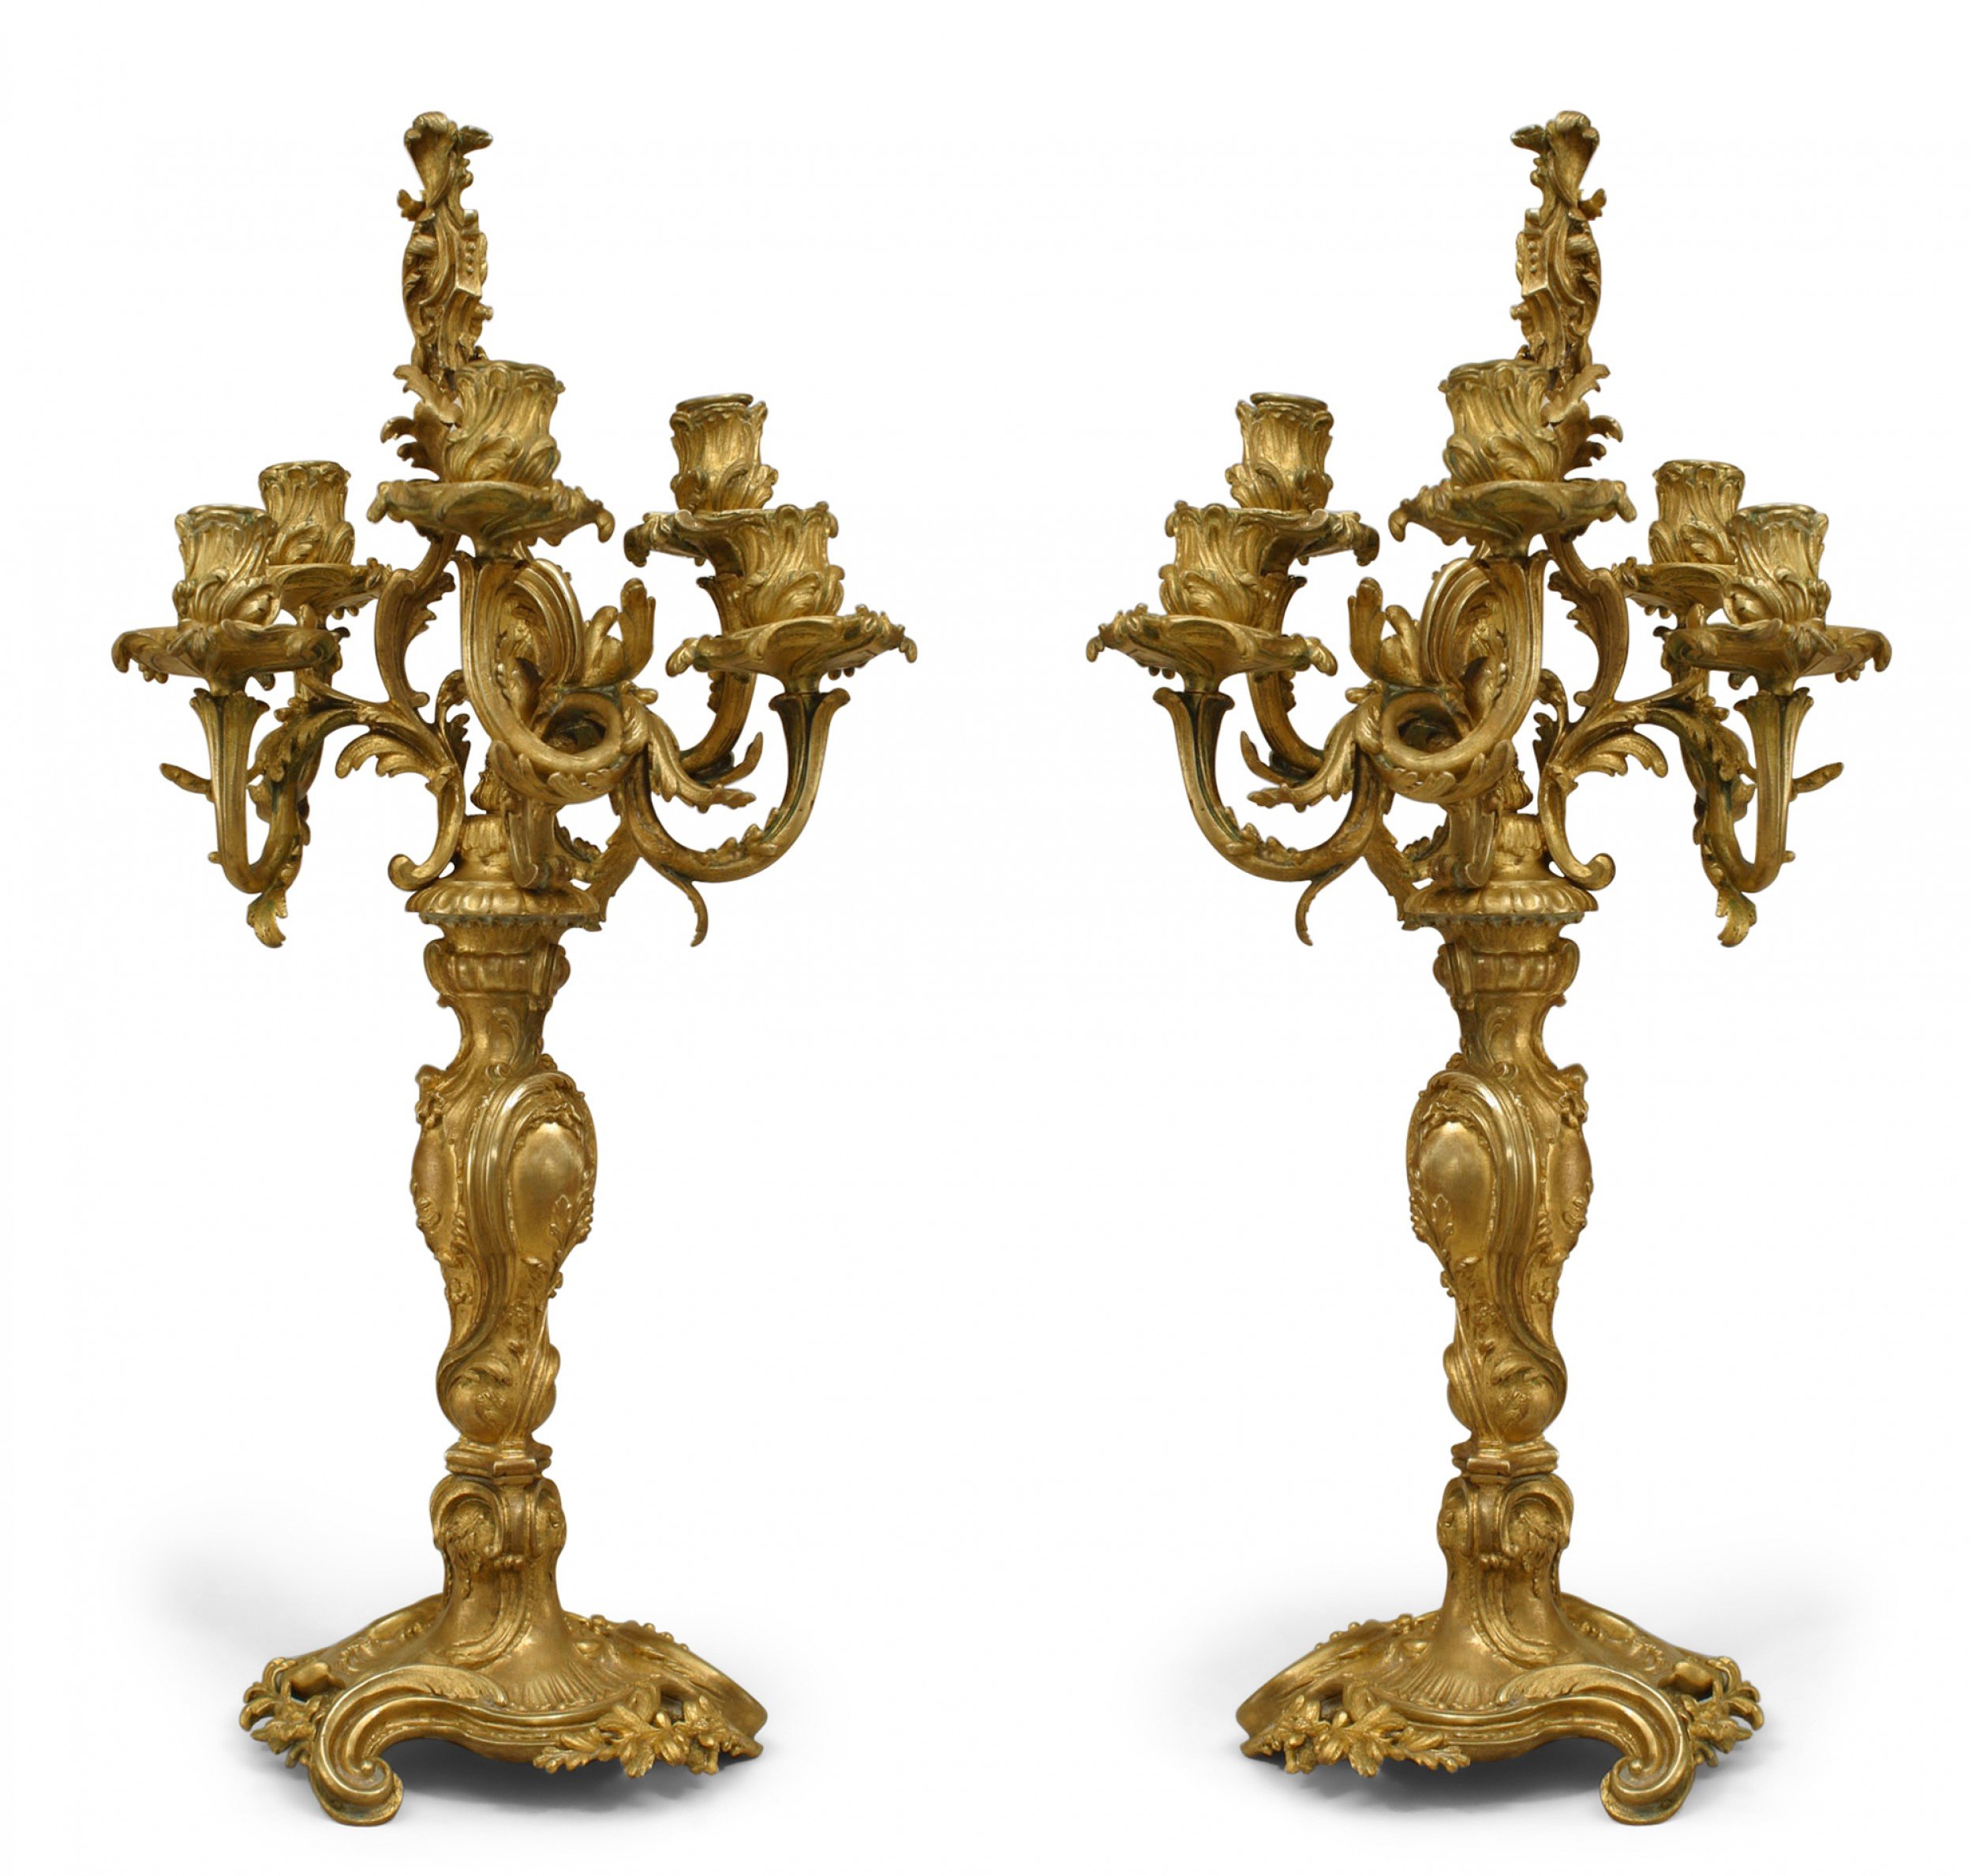 french-louis-xv-style-bronze-dore-floral-candelabras-038010a-1-lg.jpg